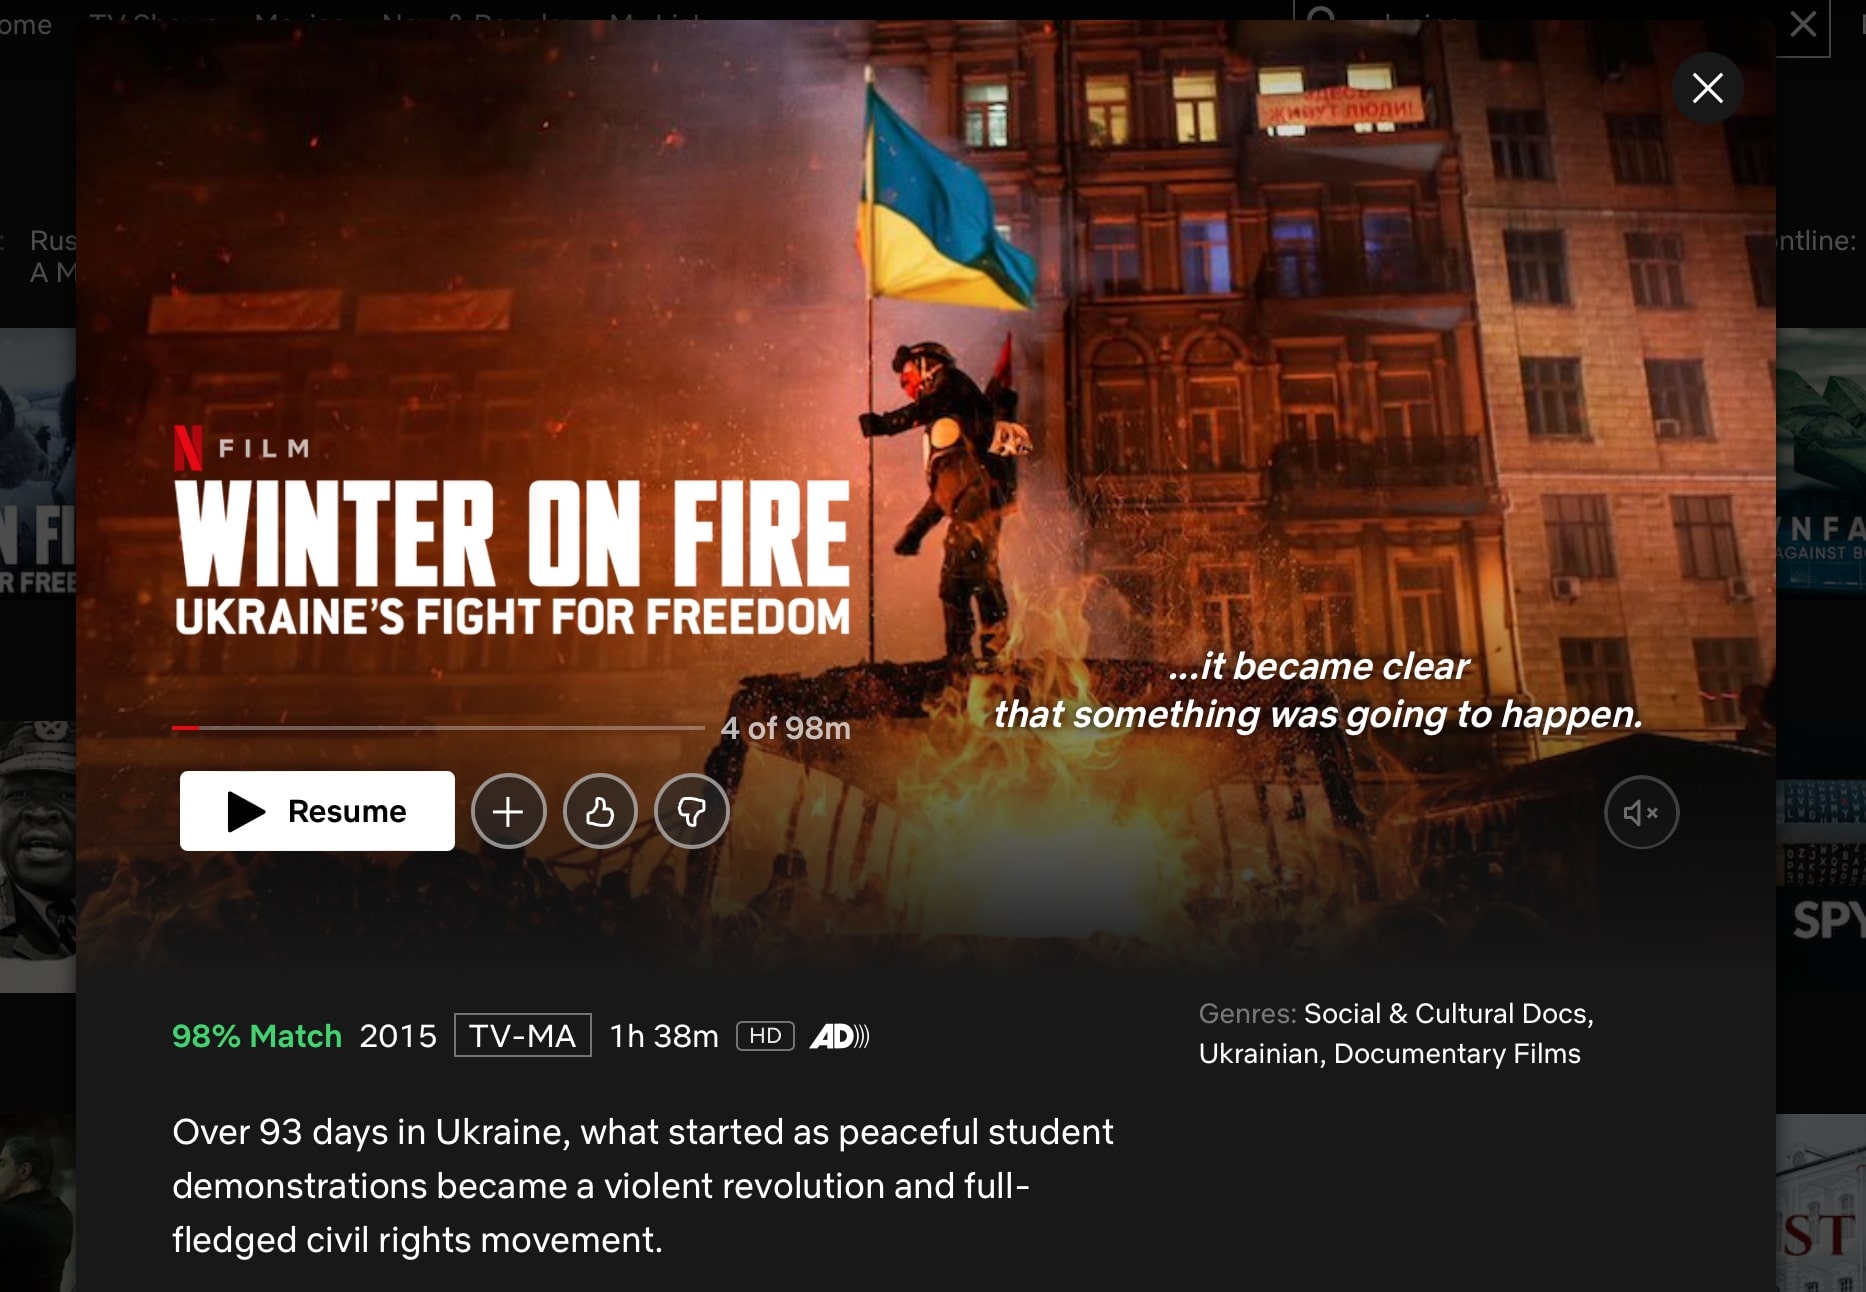 Netflix’s “Winter on Fire” Ukraine documentary is now available for free to all.